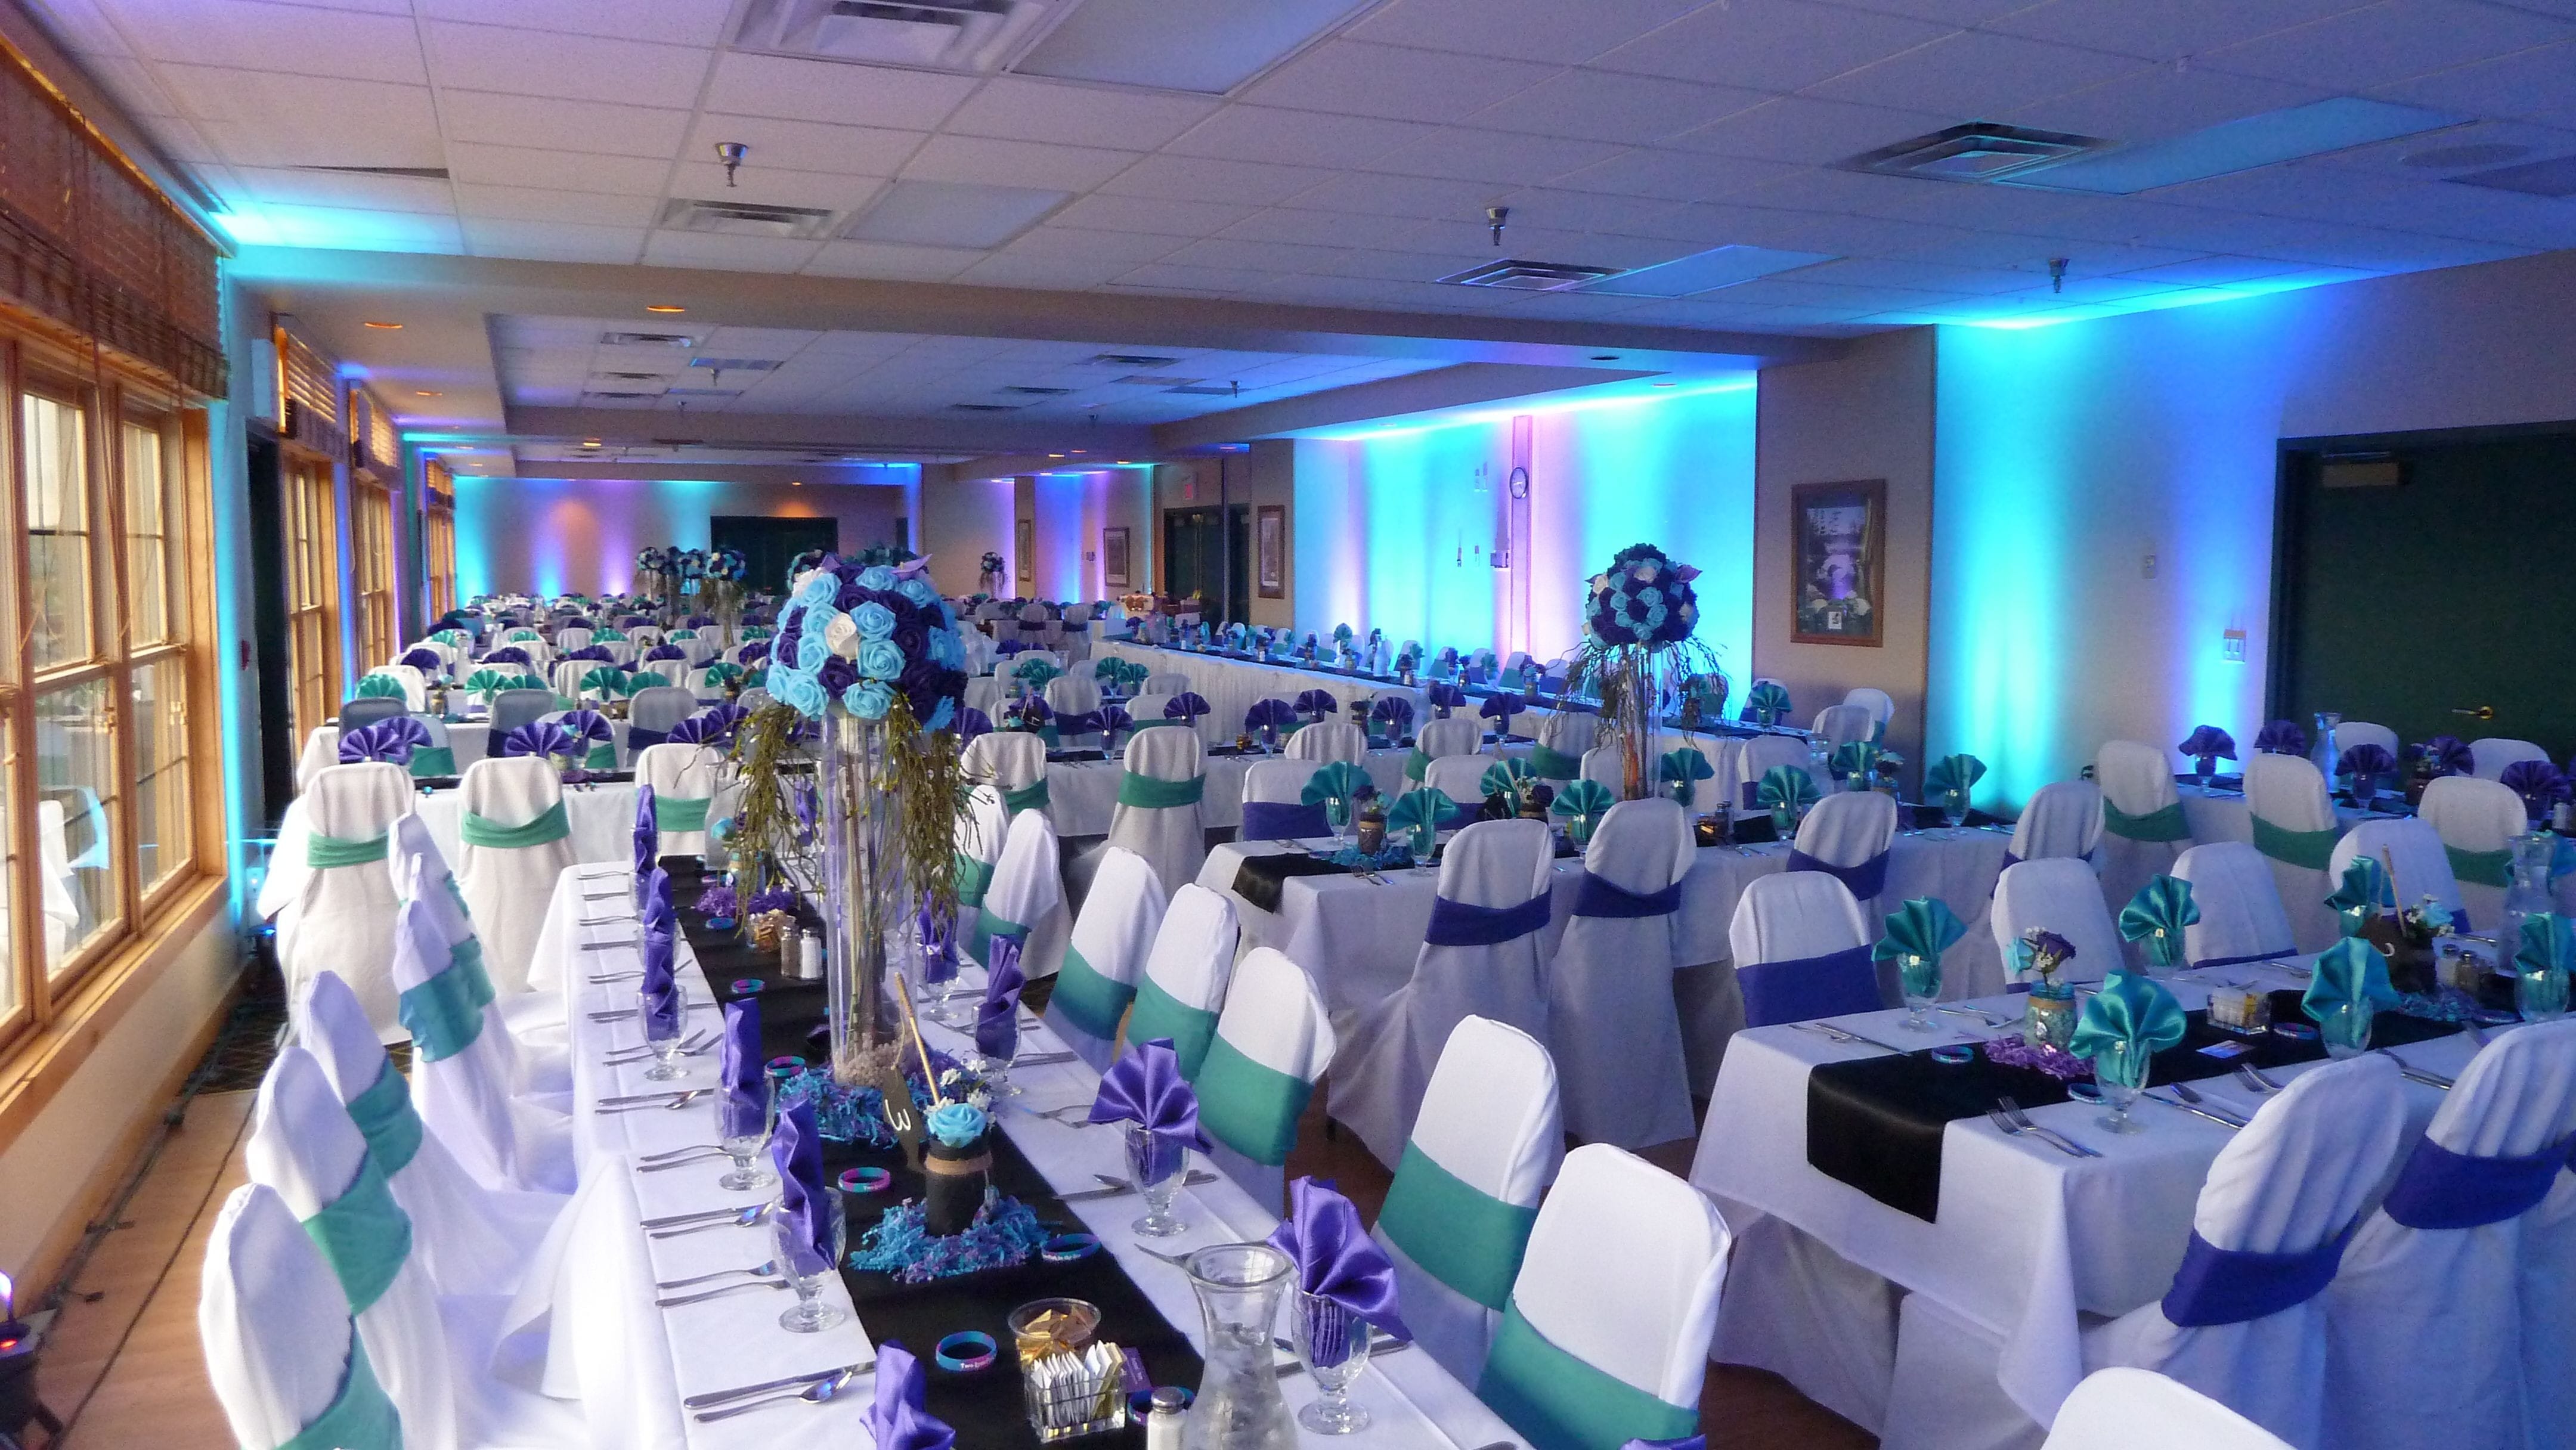 Wedding lighting at the Grand Ely Lodge. Up lighting in teal and magenta.